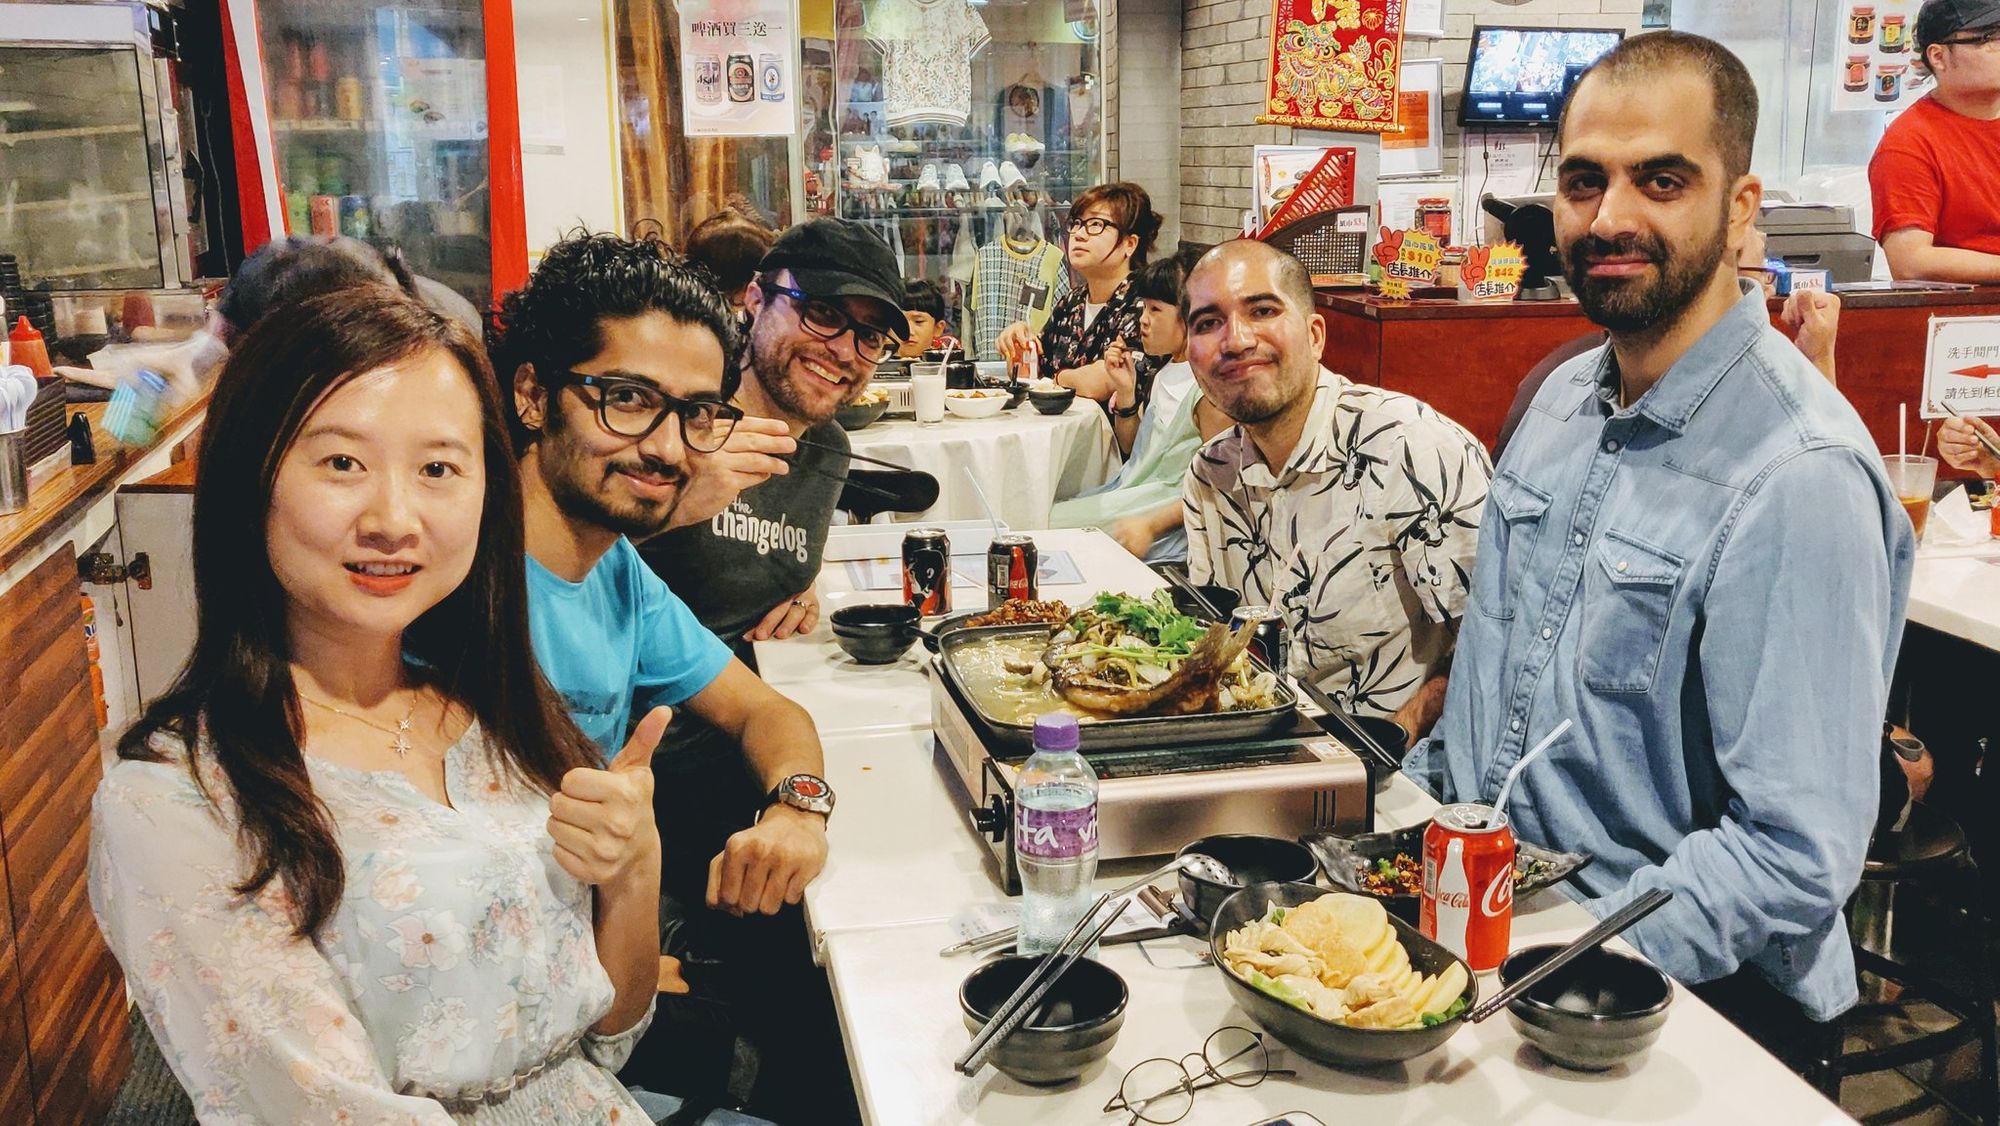 Some members of the freeCodeCamp team enjoying a meal during a meetup in Hong Kong.